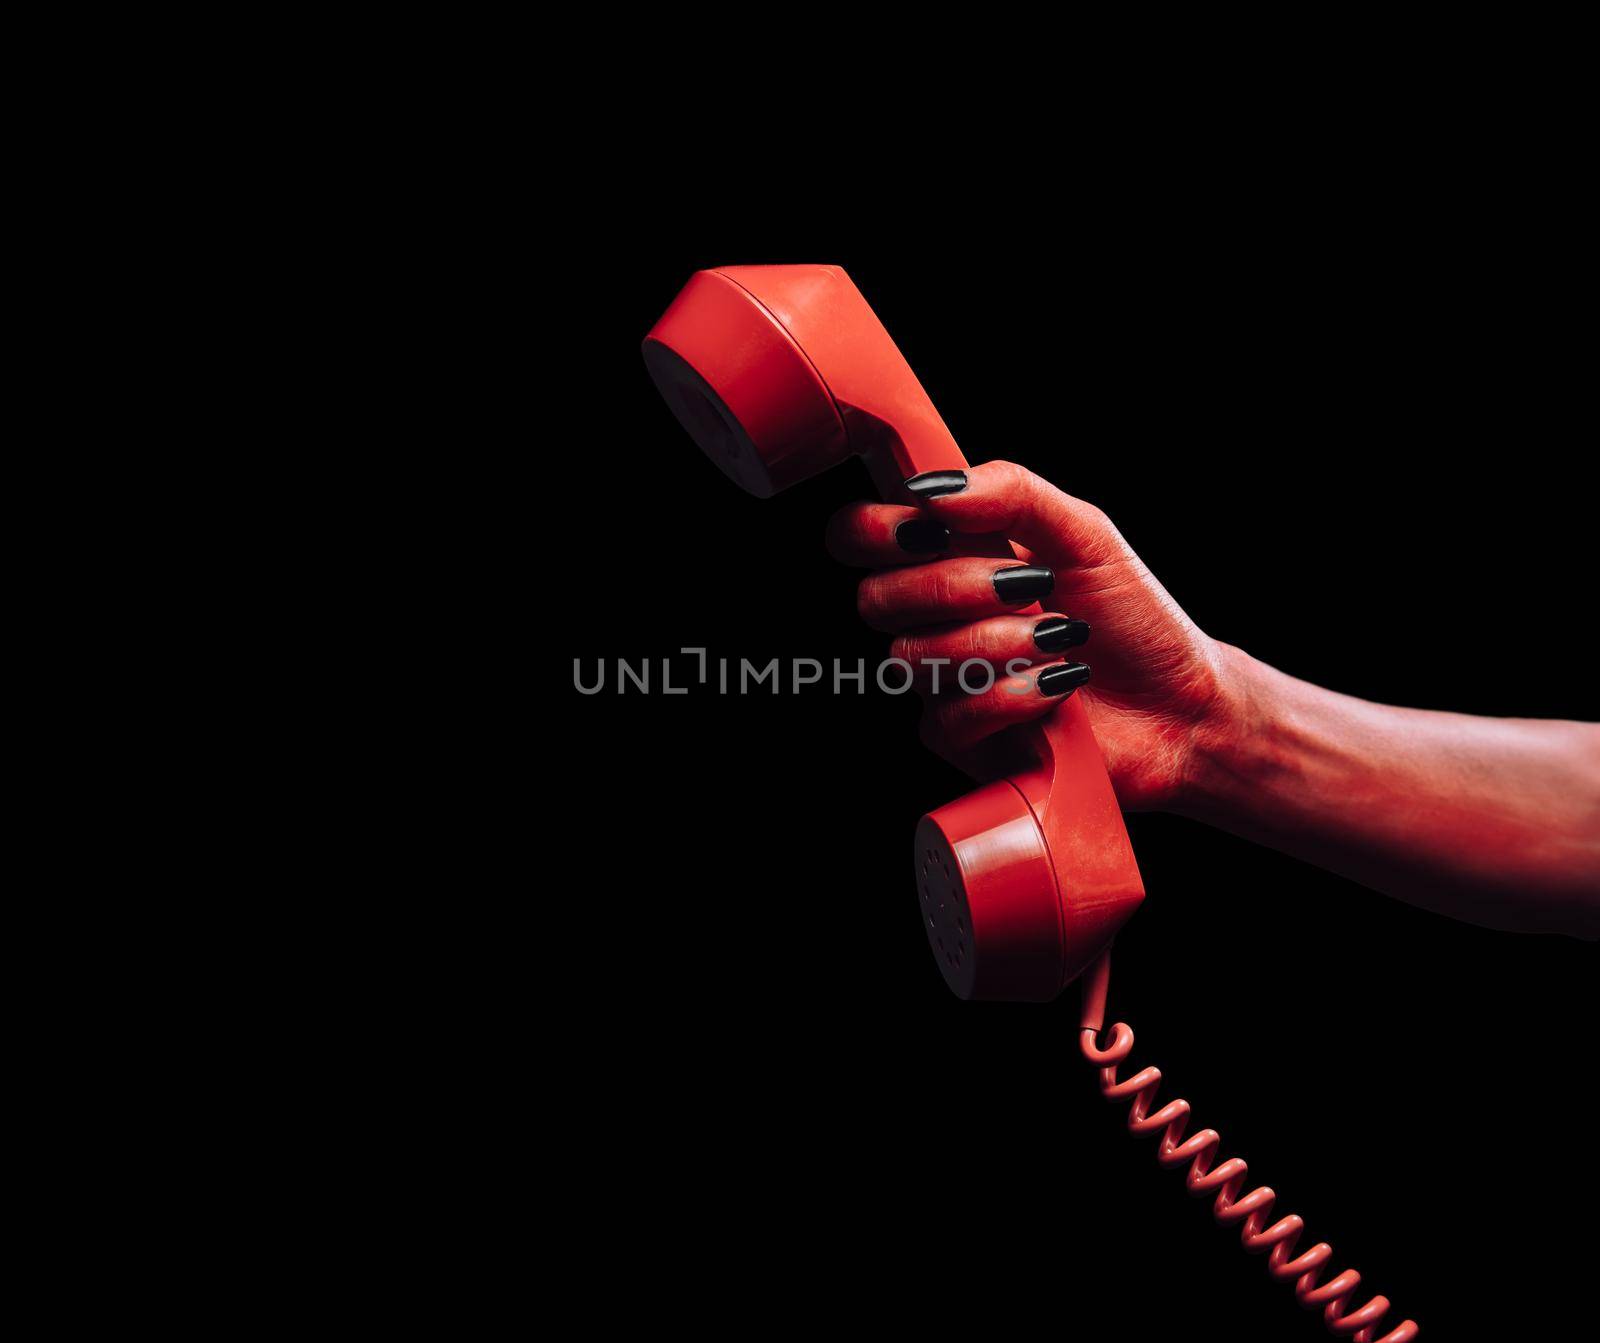 Red demon hand gives phone handset on dark background, space for text, Halloween or horror theme